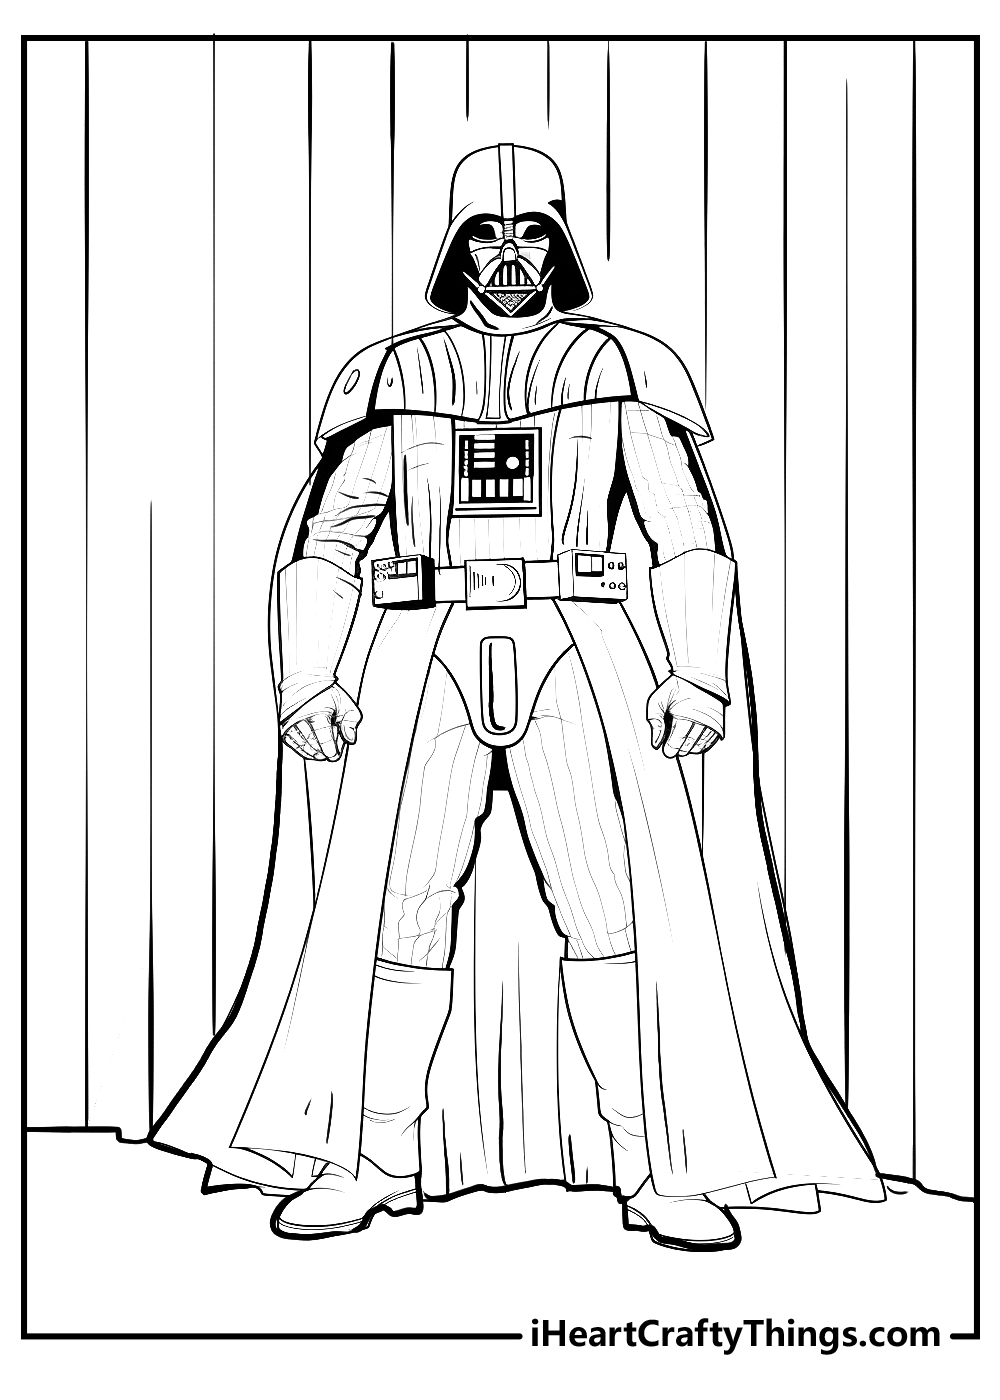 Printable darth vader coloring pages updated